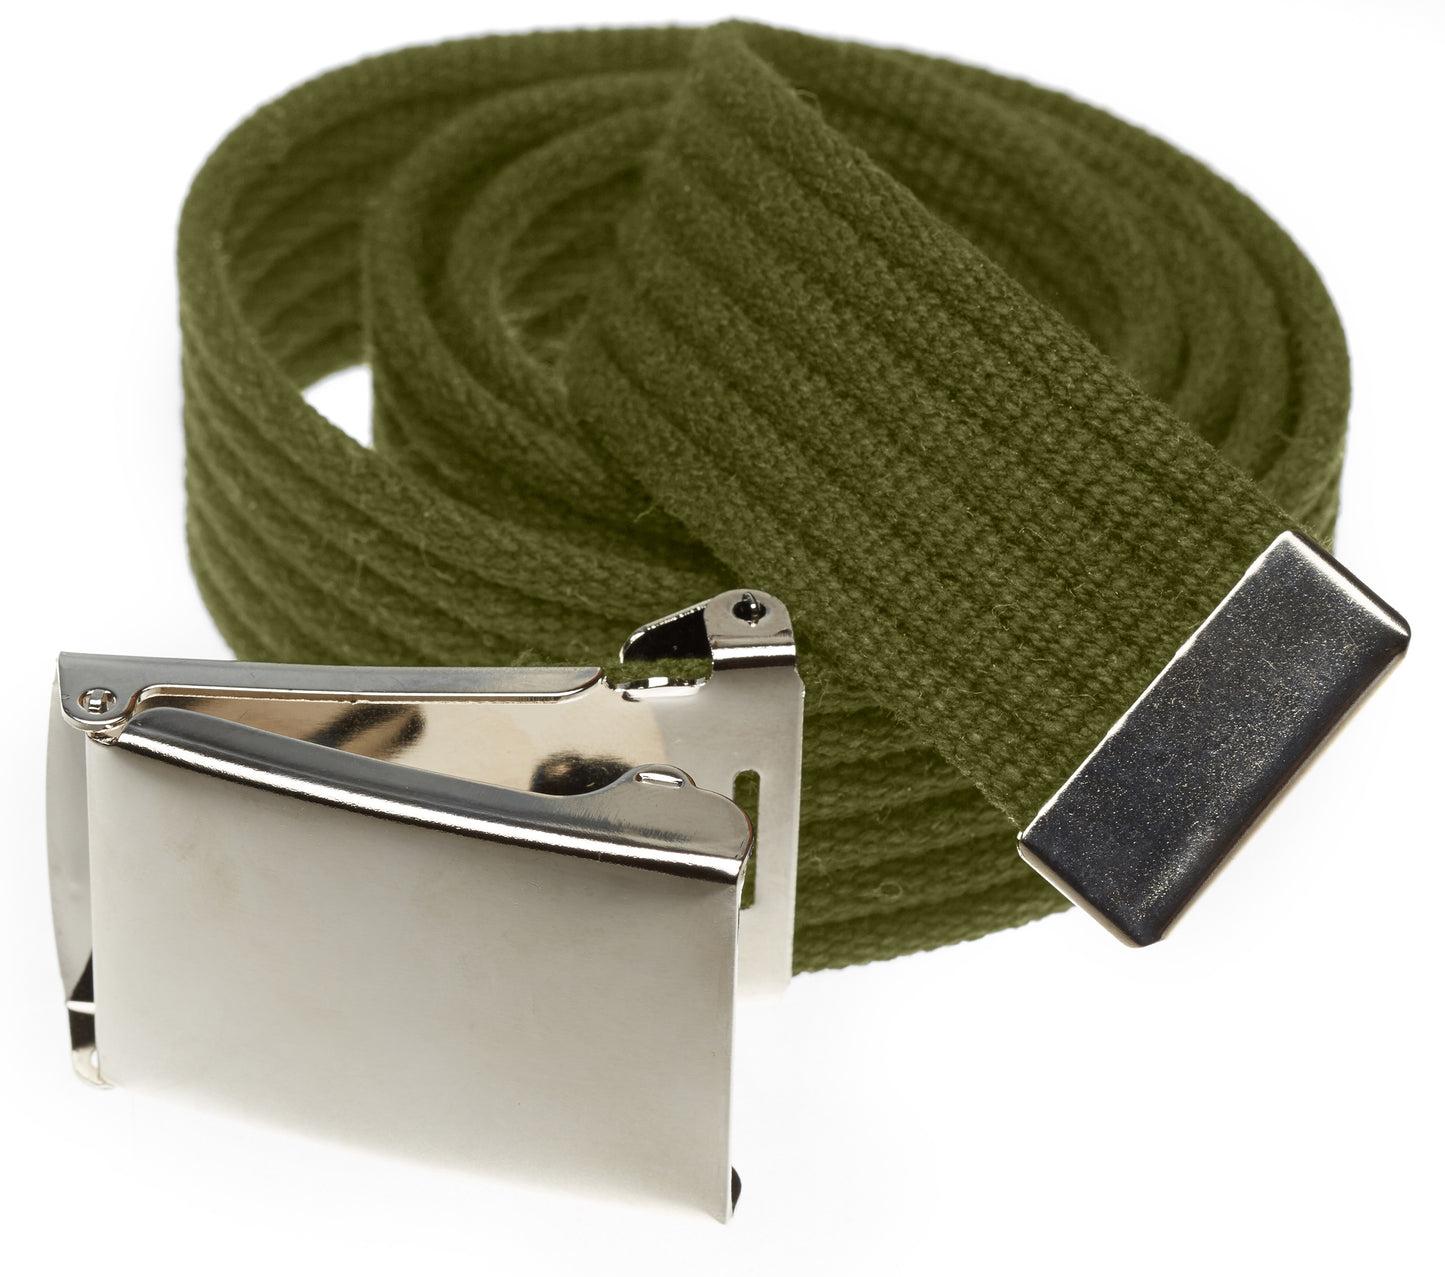 Ribbed Web Belt with Silver Flip Top Buckle- 5 Colors!